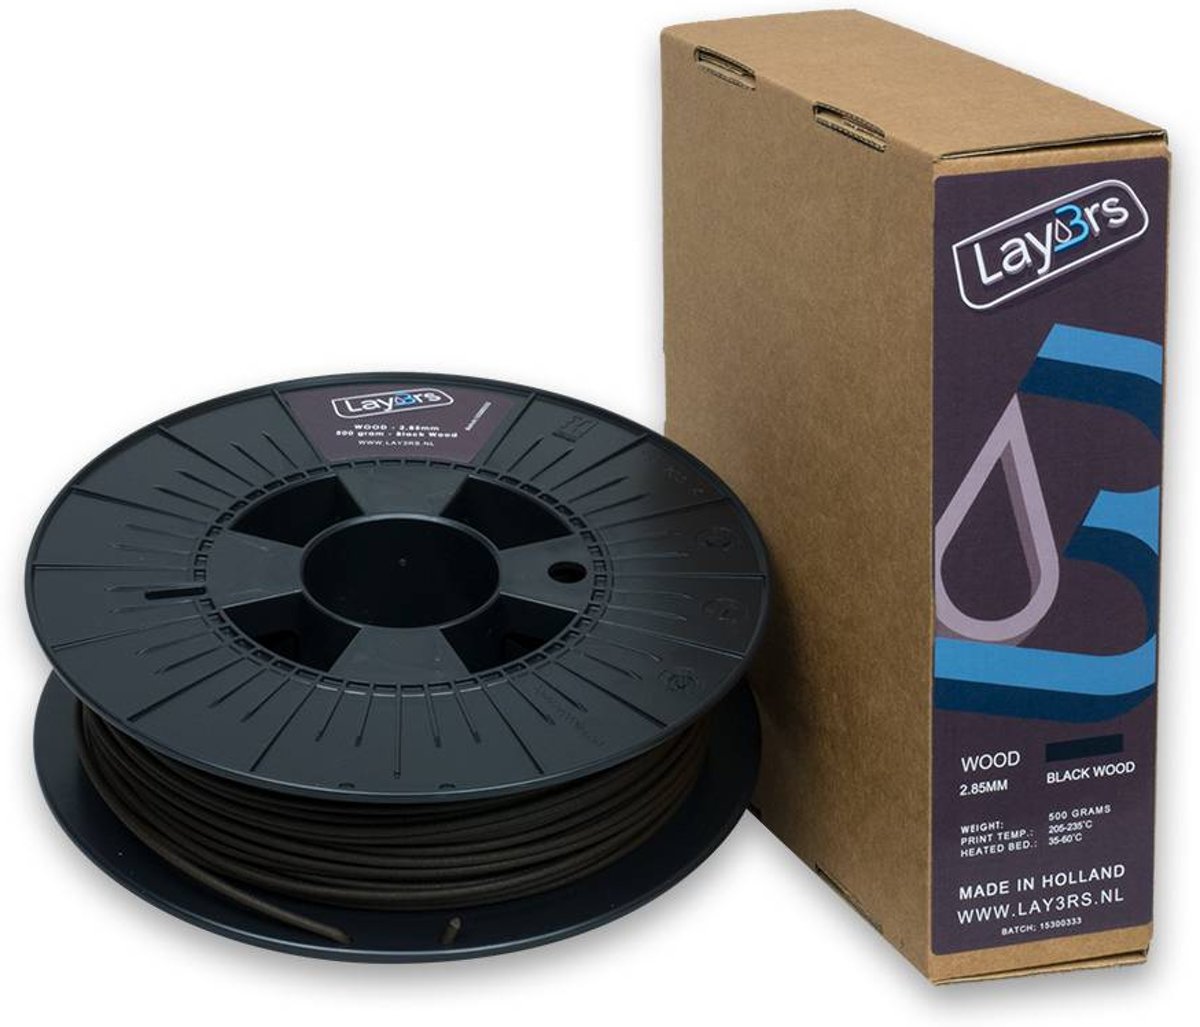 Lay3rs Woodfill Black Wood - 2.85 mm